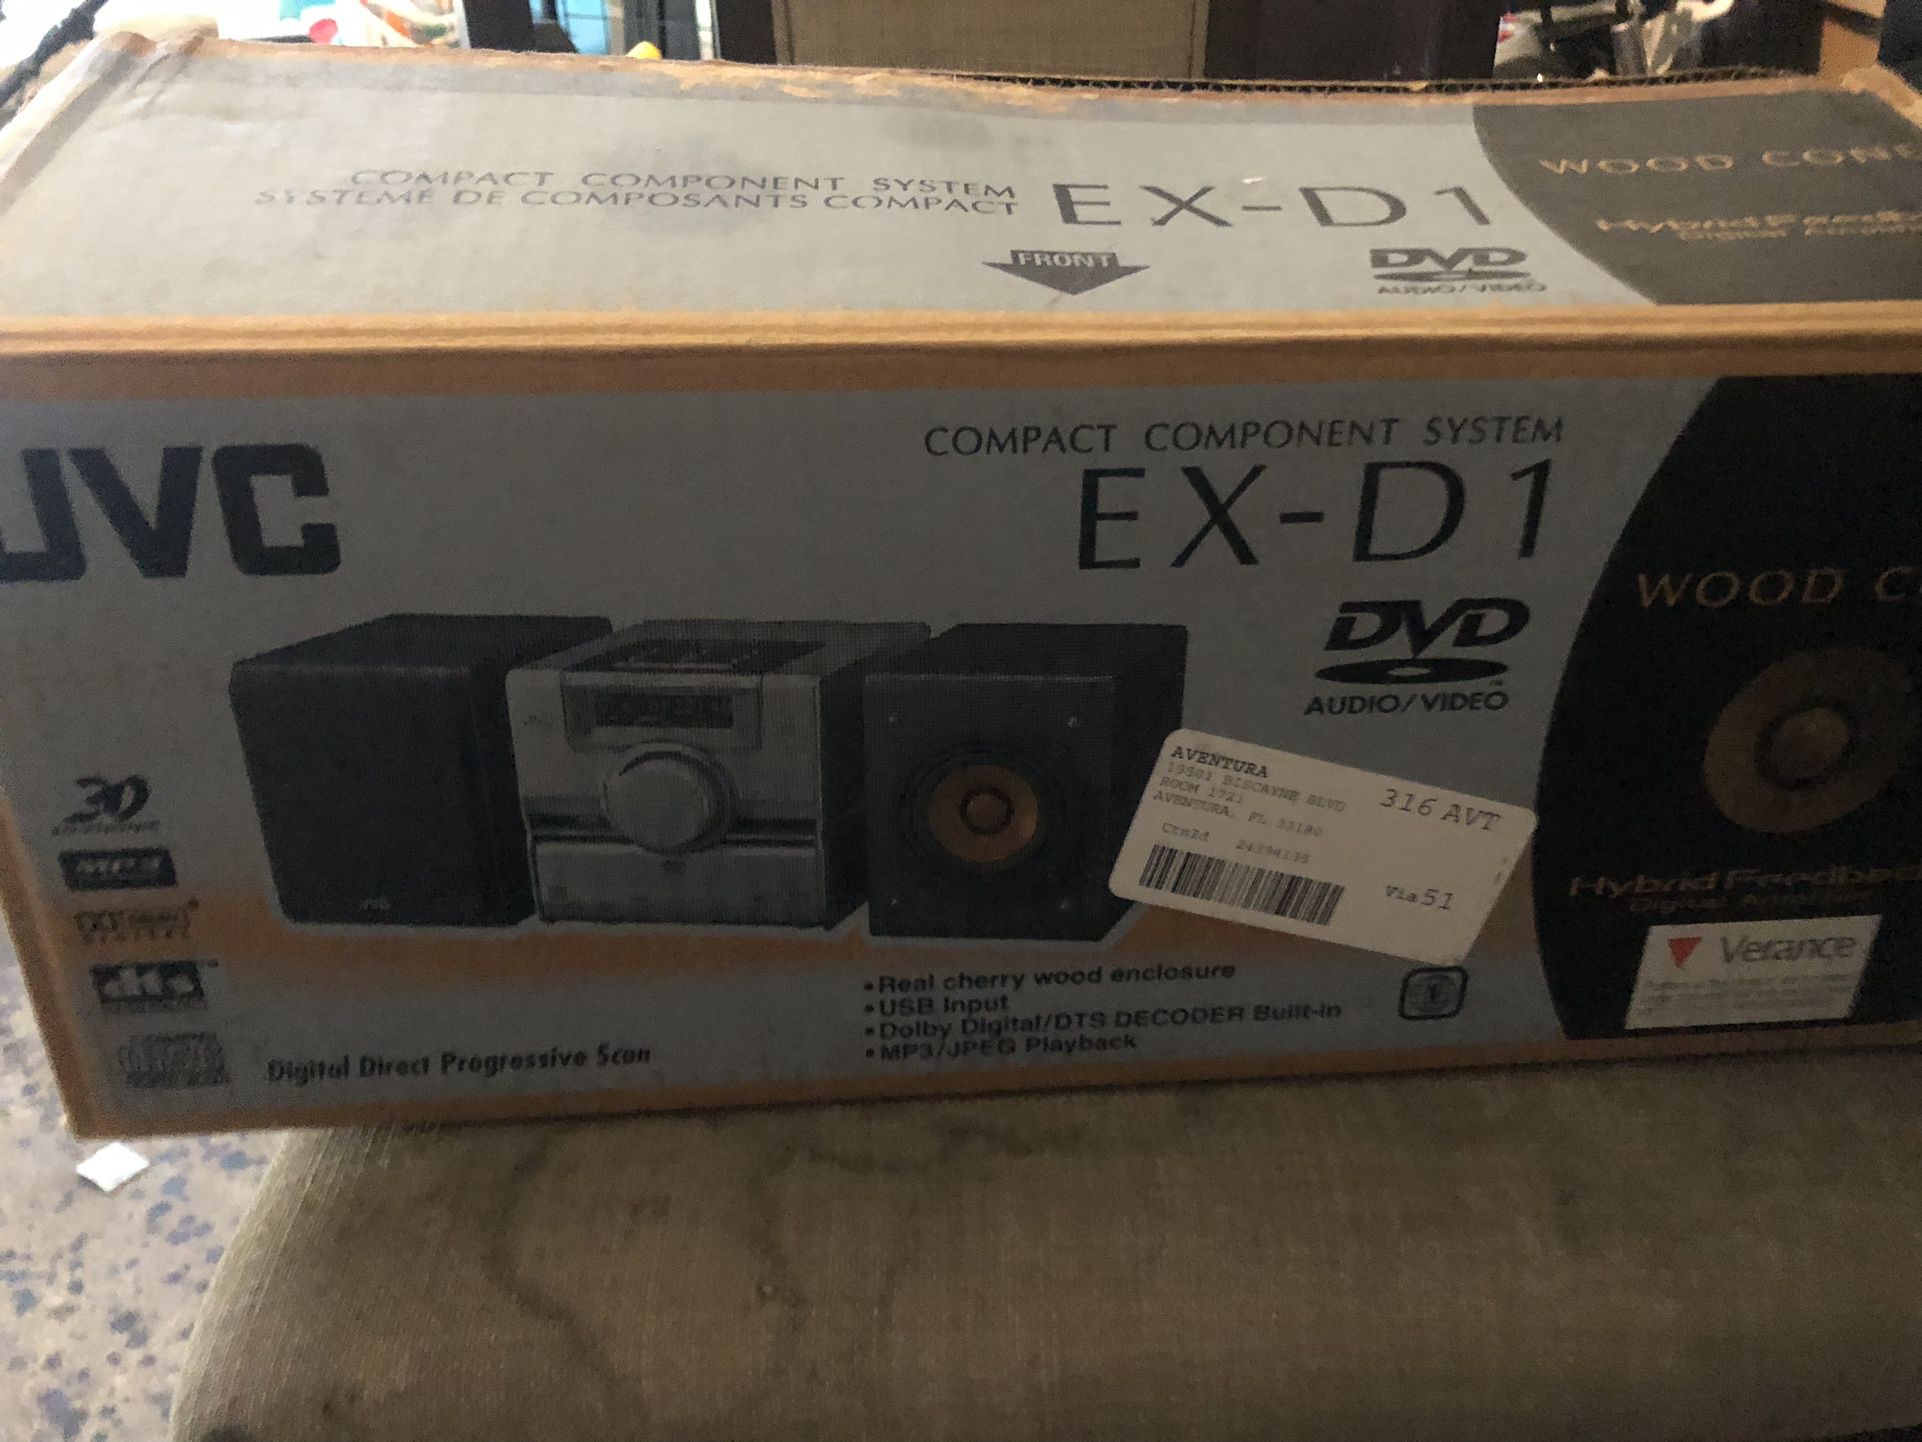 Jvc Ex-d1 Dvd Audio Video Wood Cone Speakers Stereo Receiver Compact